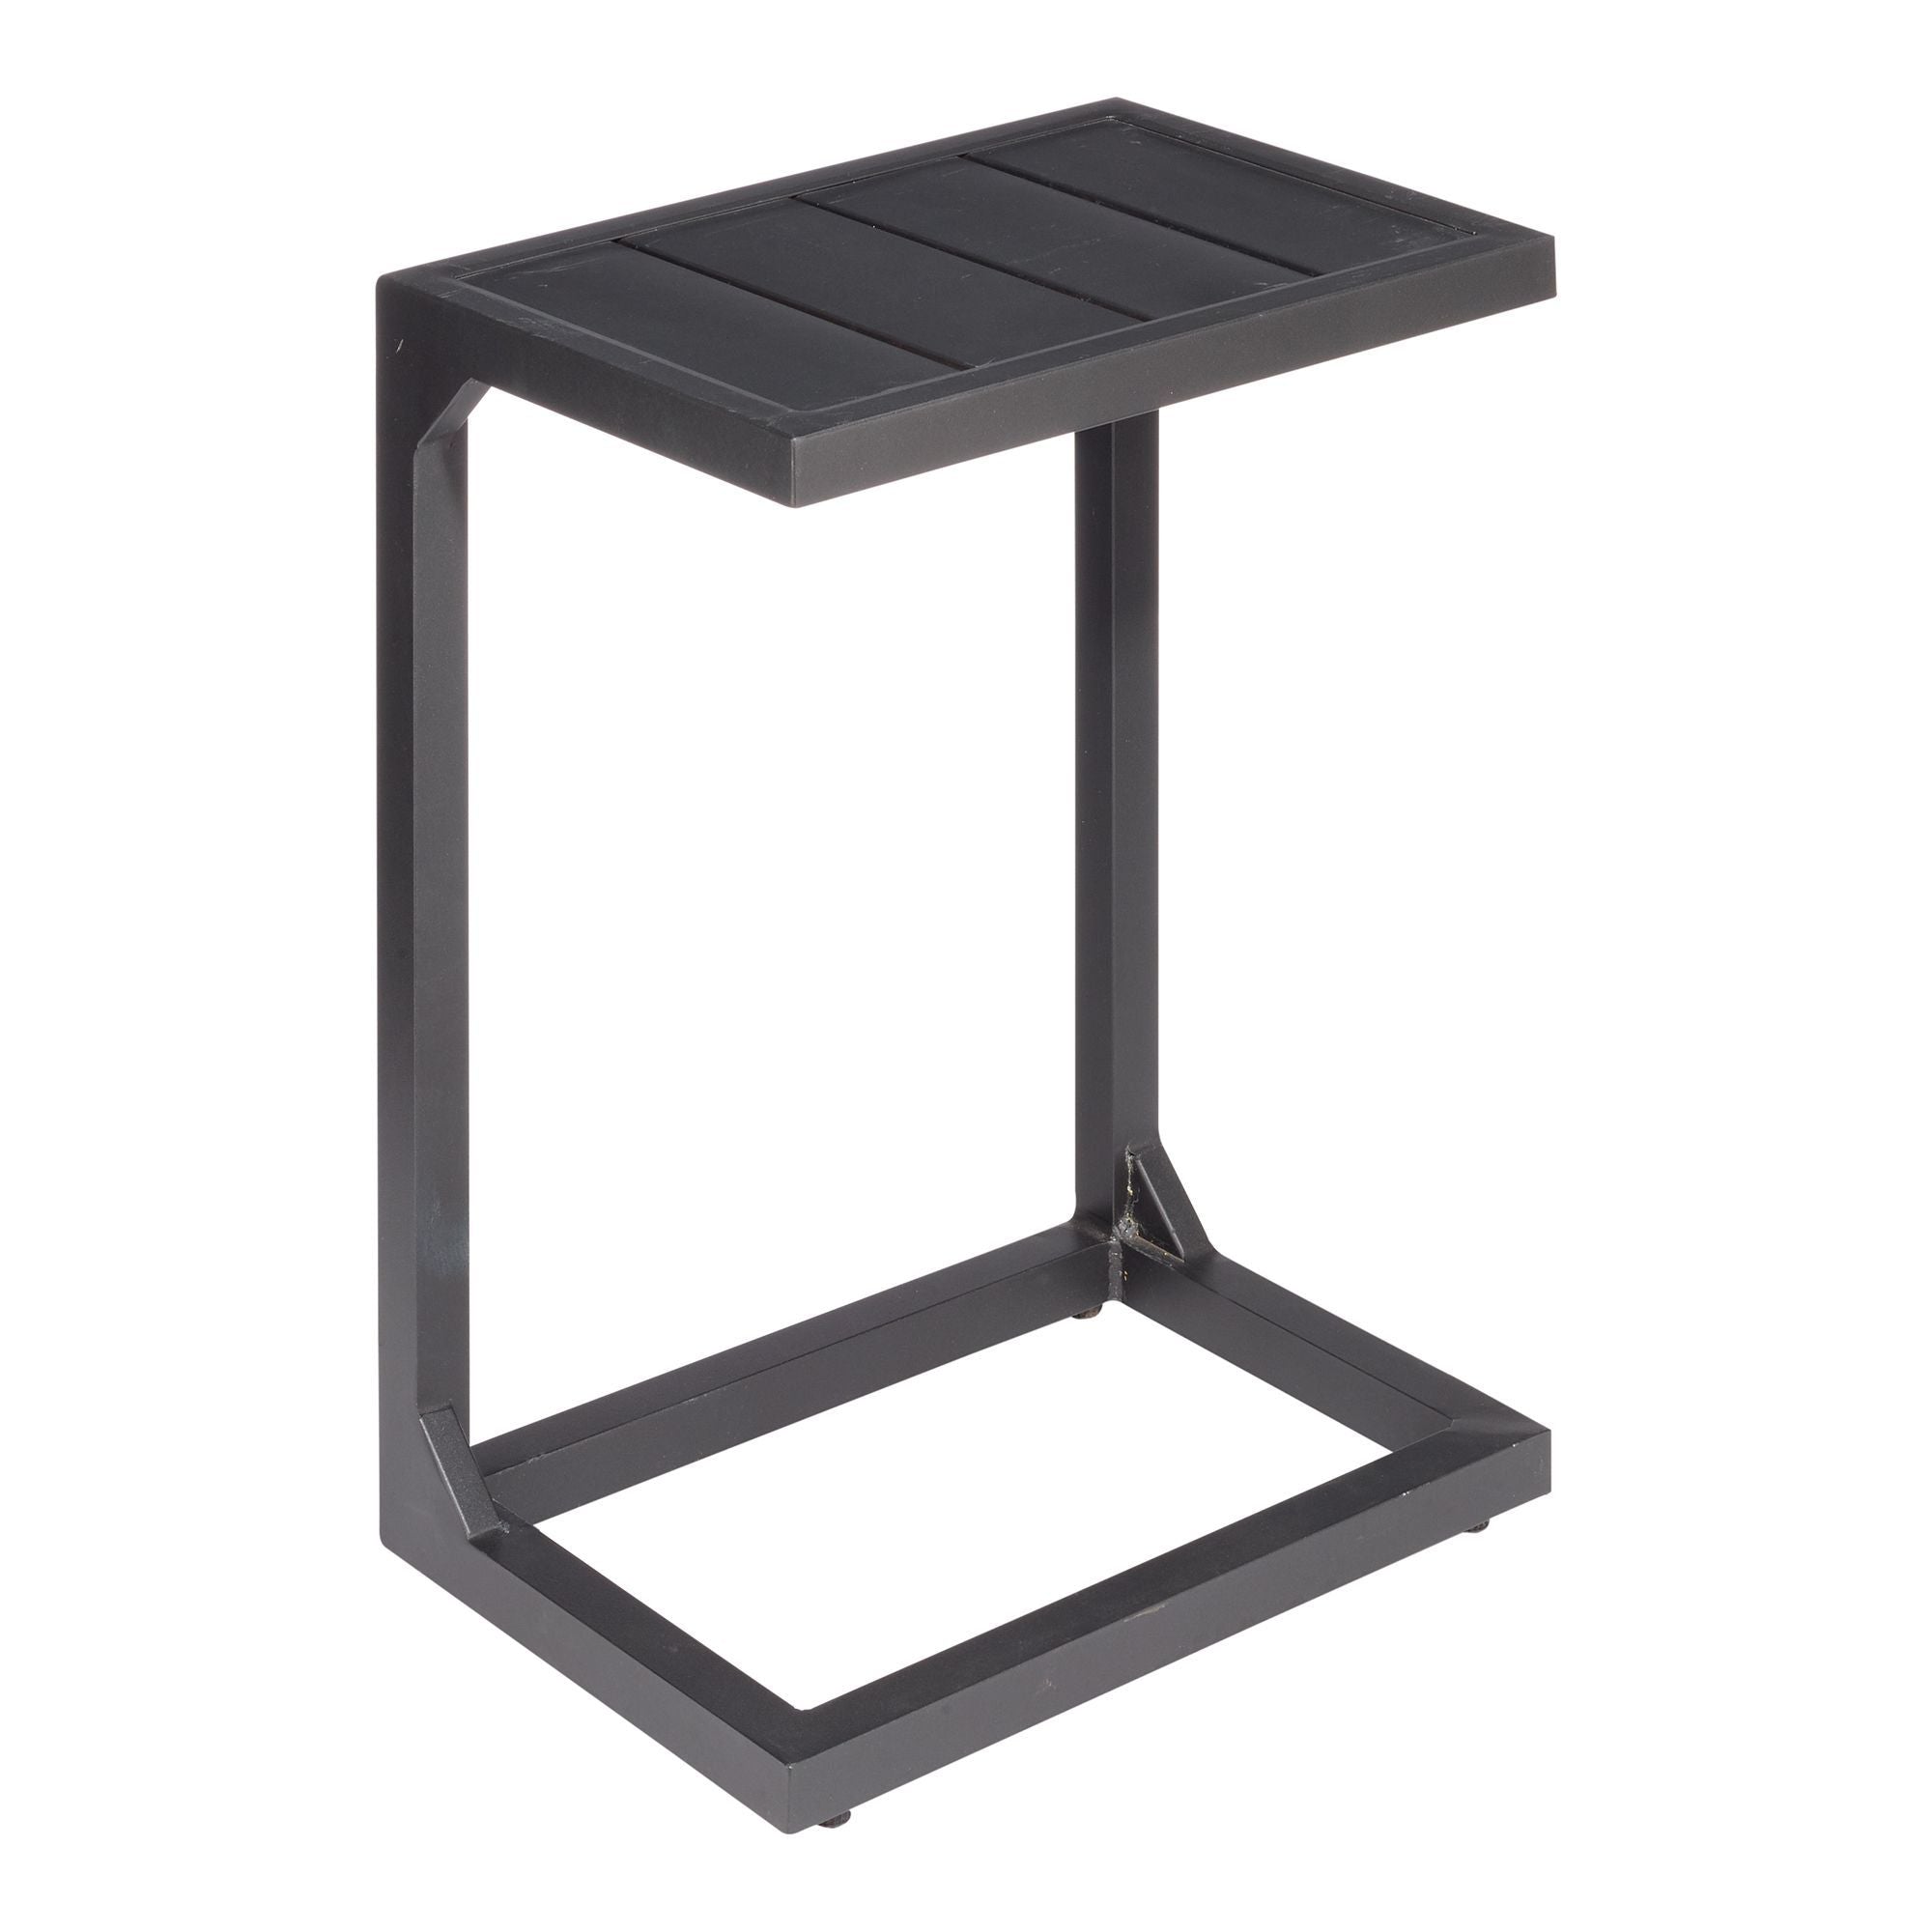 PatioZone Side Table with Aluminum Frame and Slats Tabletop (MOSS-0832N) - Black